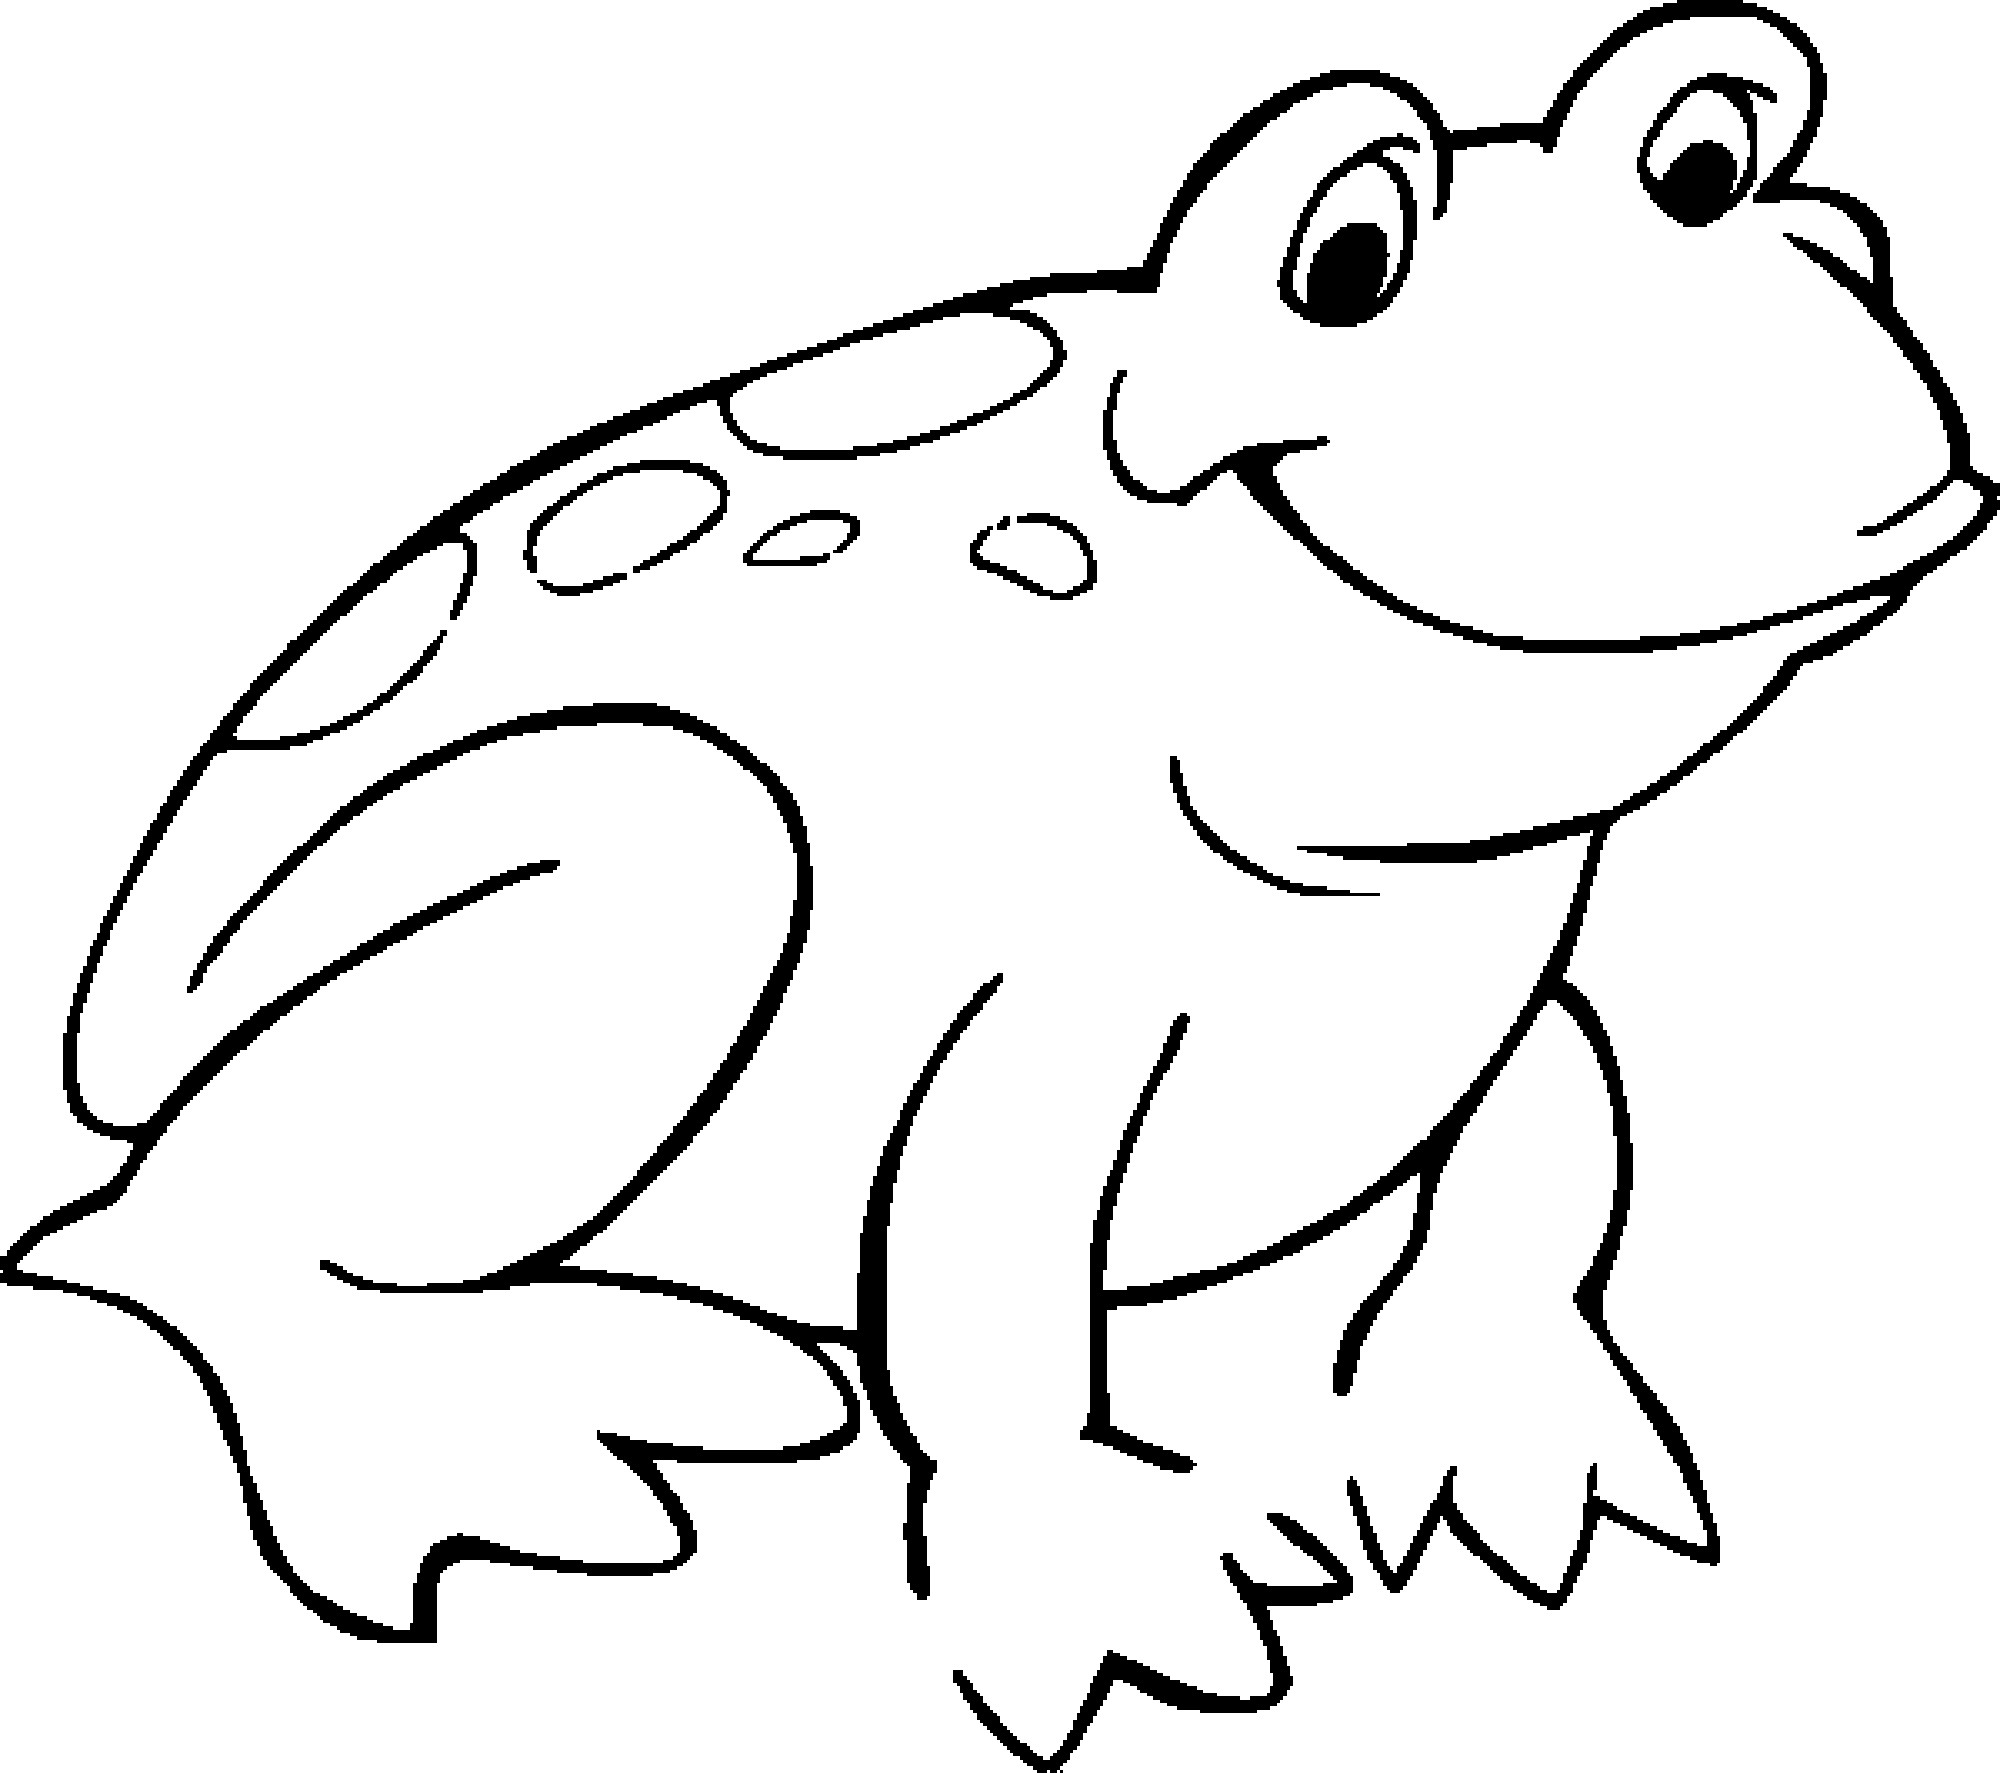 Frog Coloring Sheet
 Print & Download Frog Coloring Pages Theme for Kids